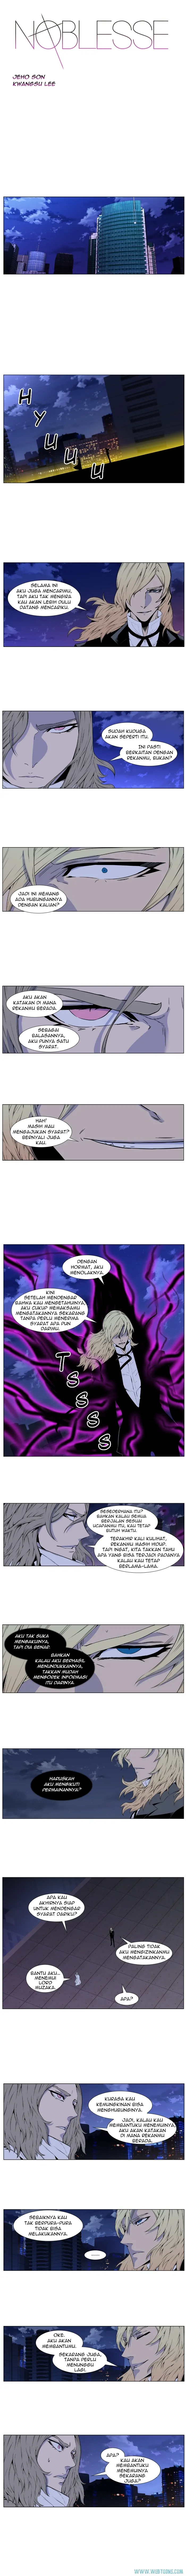 Noblesse Chapter 416 - 37